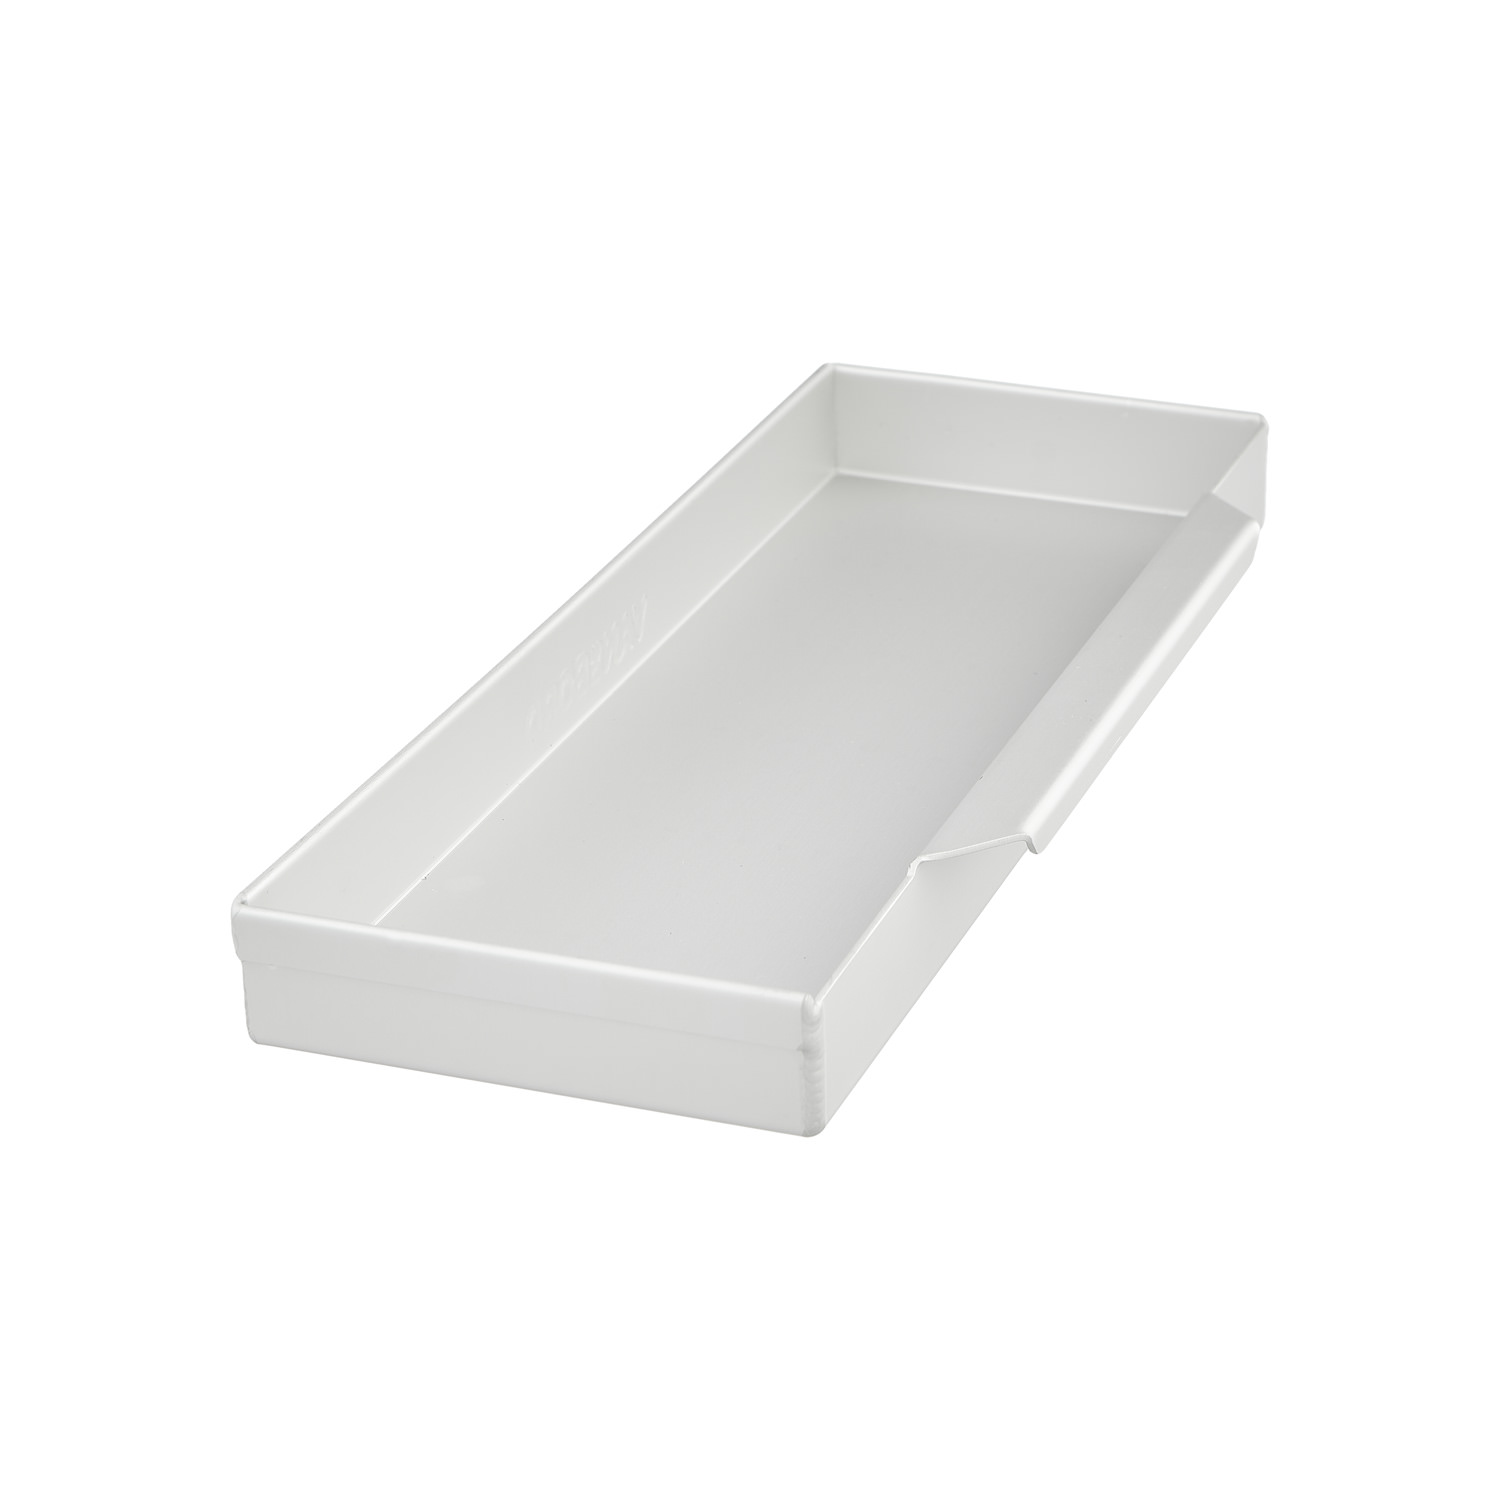 Sidebox for Airline Trolleys 30.5 x 11.0 x 3.0 cm